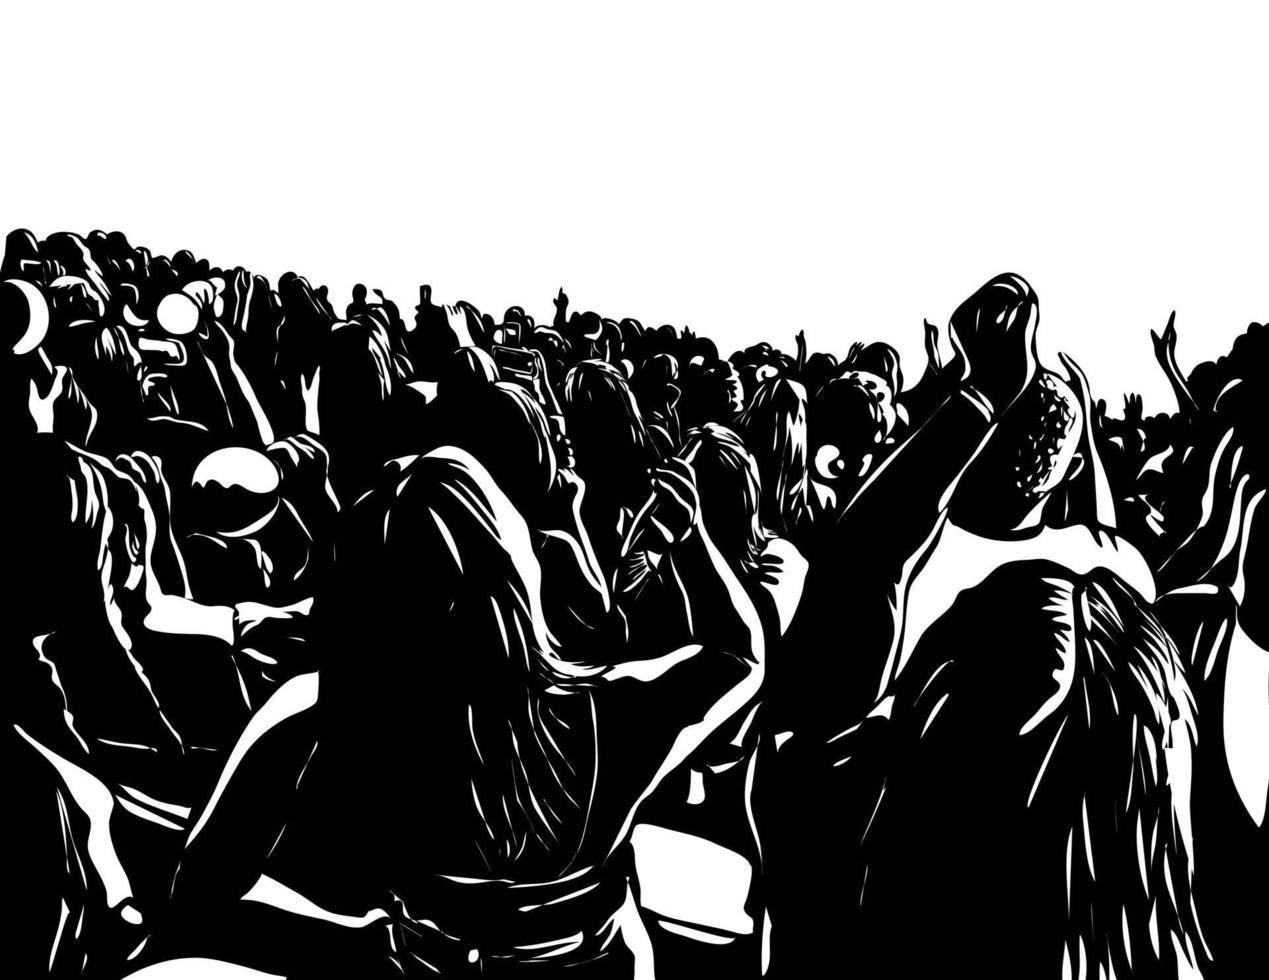 Crowd of People Watching a Concert Holding Mobile Phones Woodcut Black and White vector